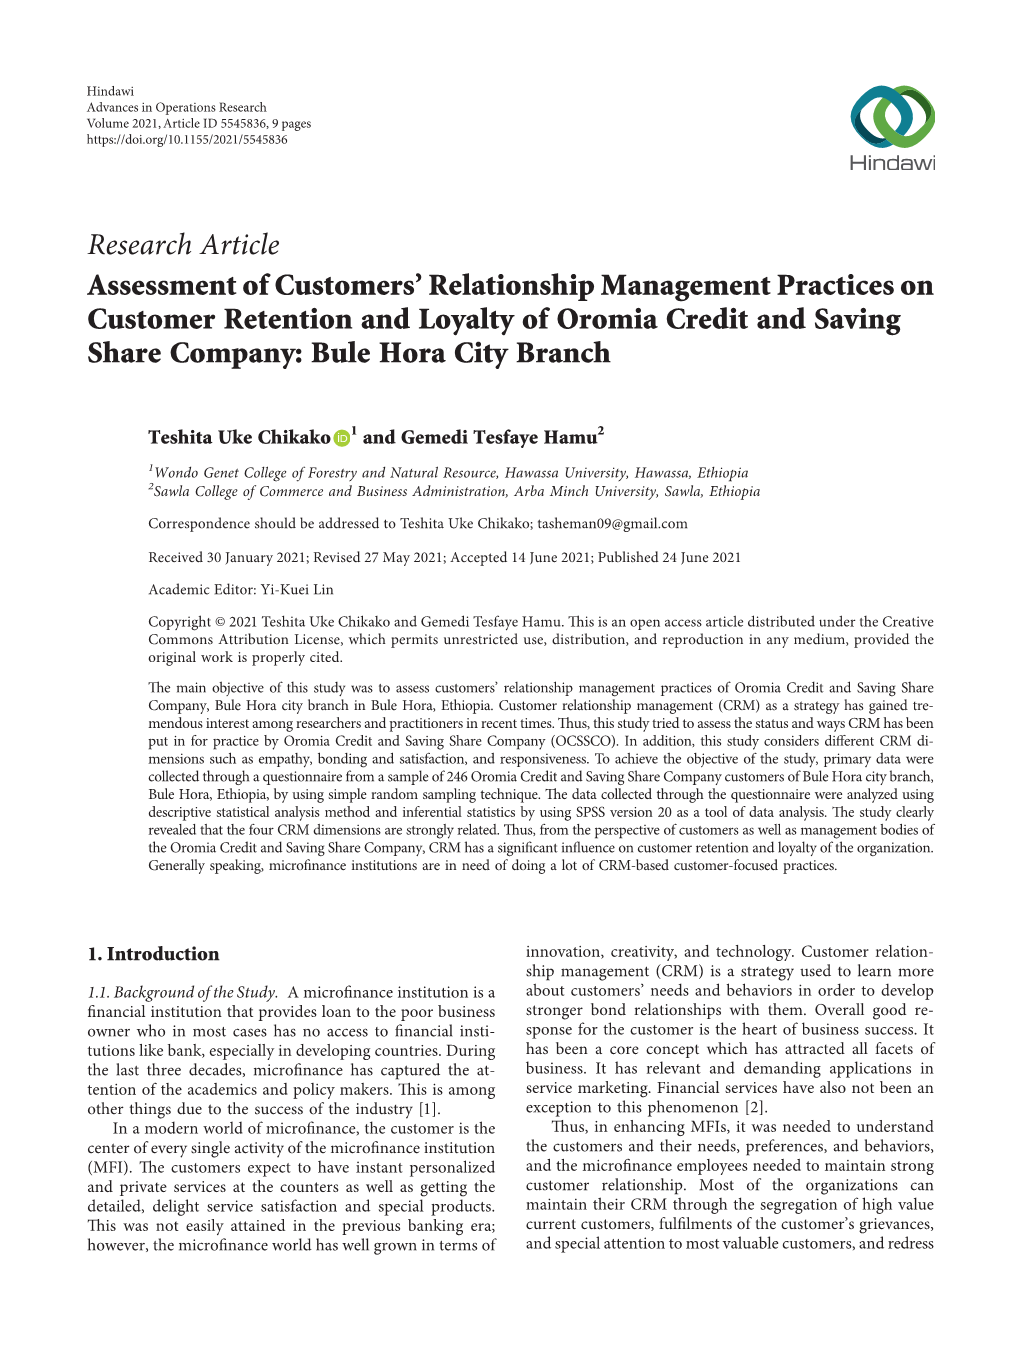 Research Article Assessment of Customers' Relationship